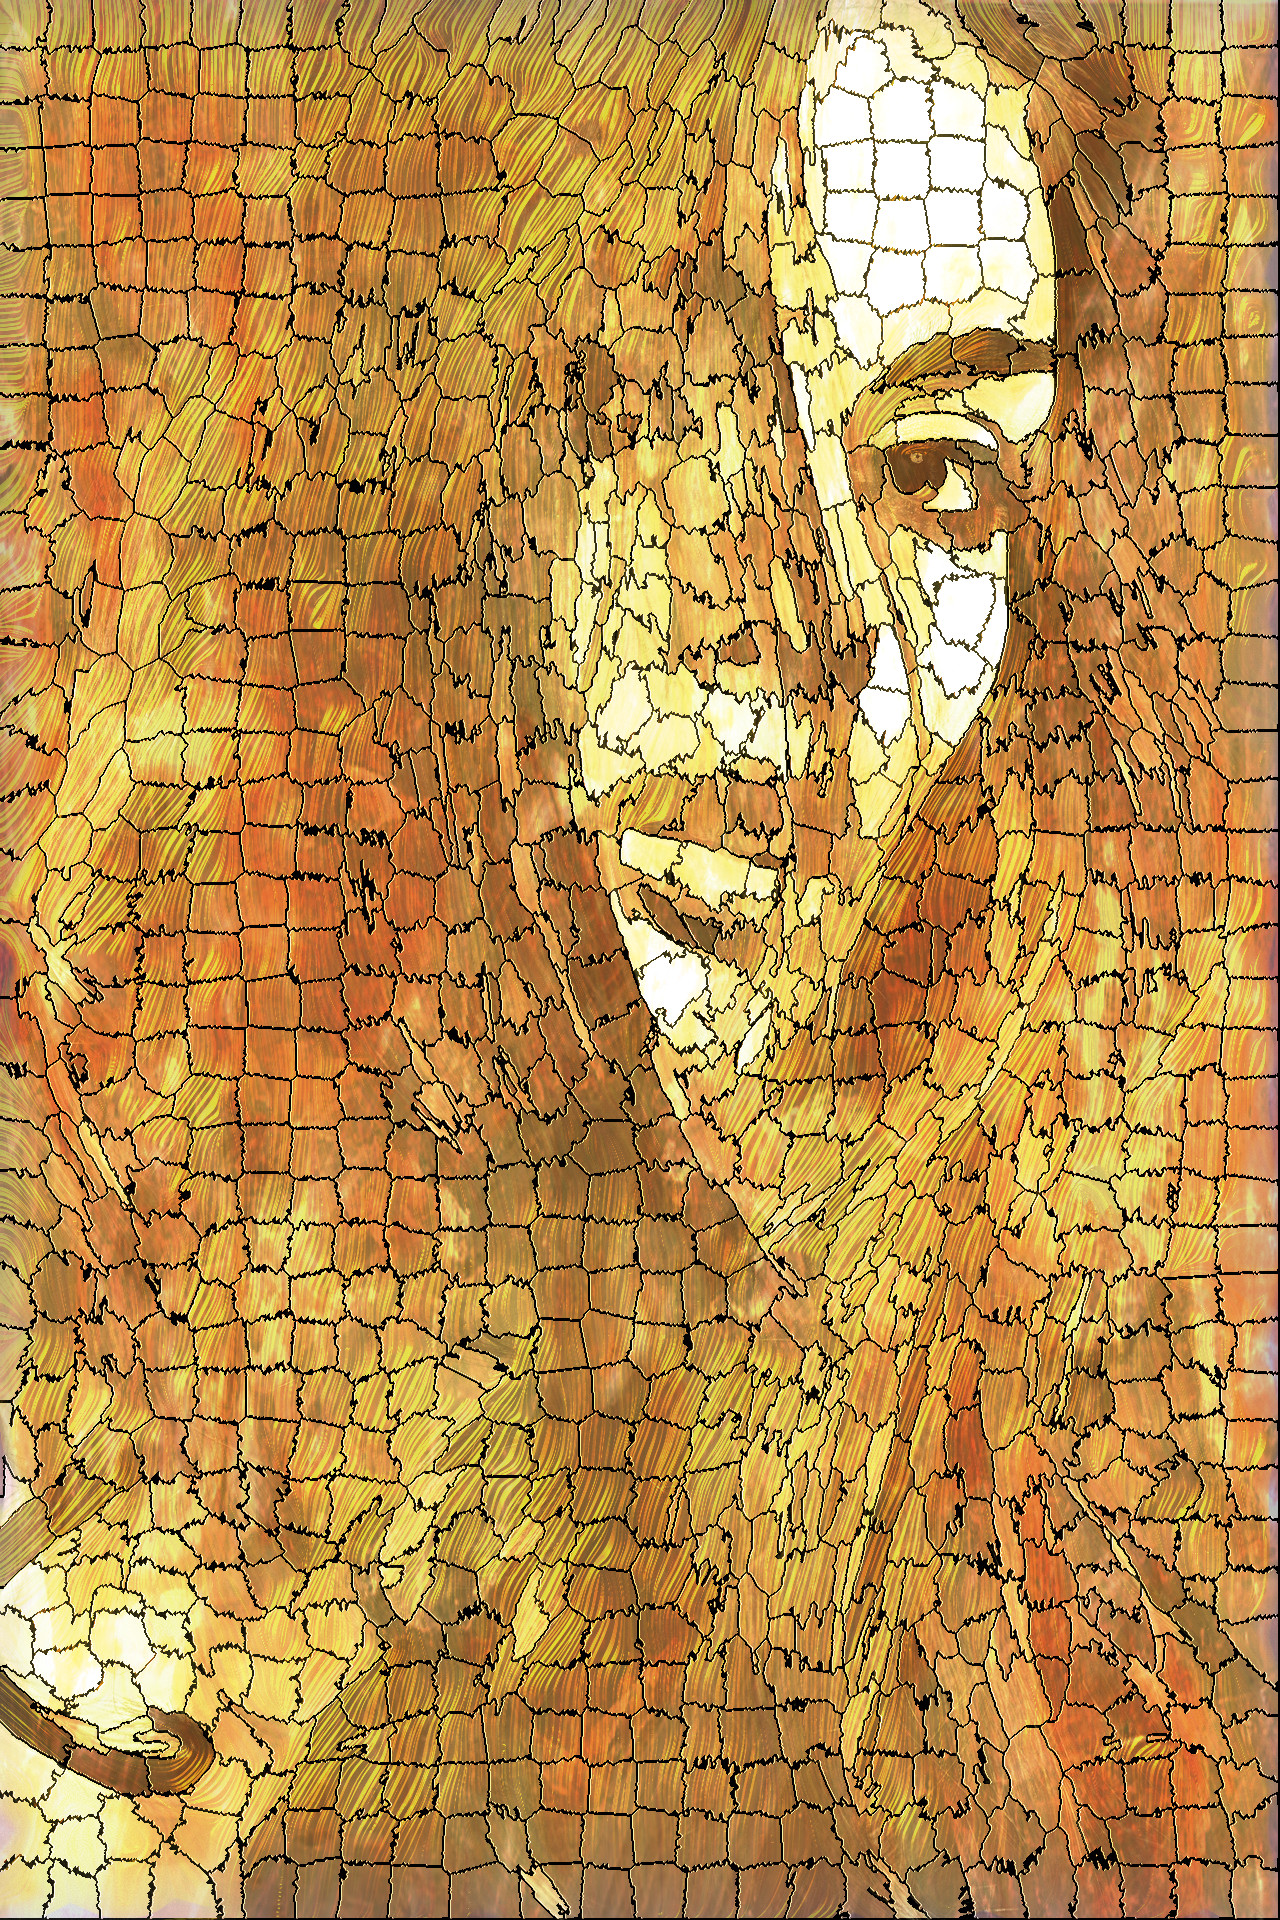 2023-09-02 09-03-43woman-2350565_1920 with a simple mosaic effect.jpeg